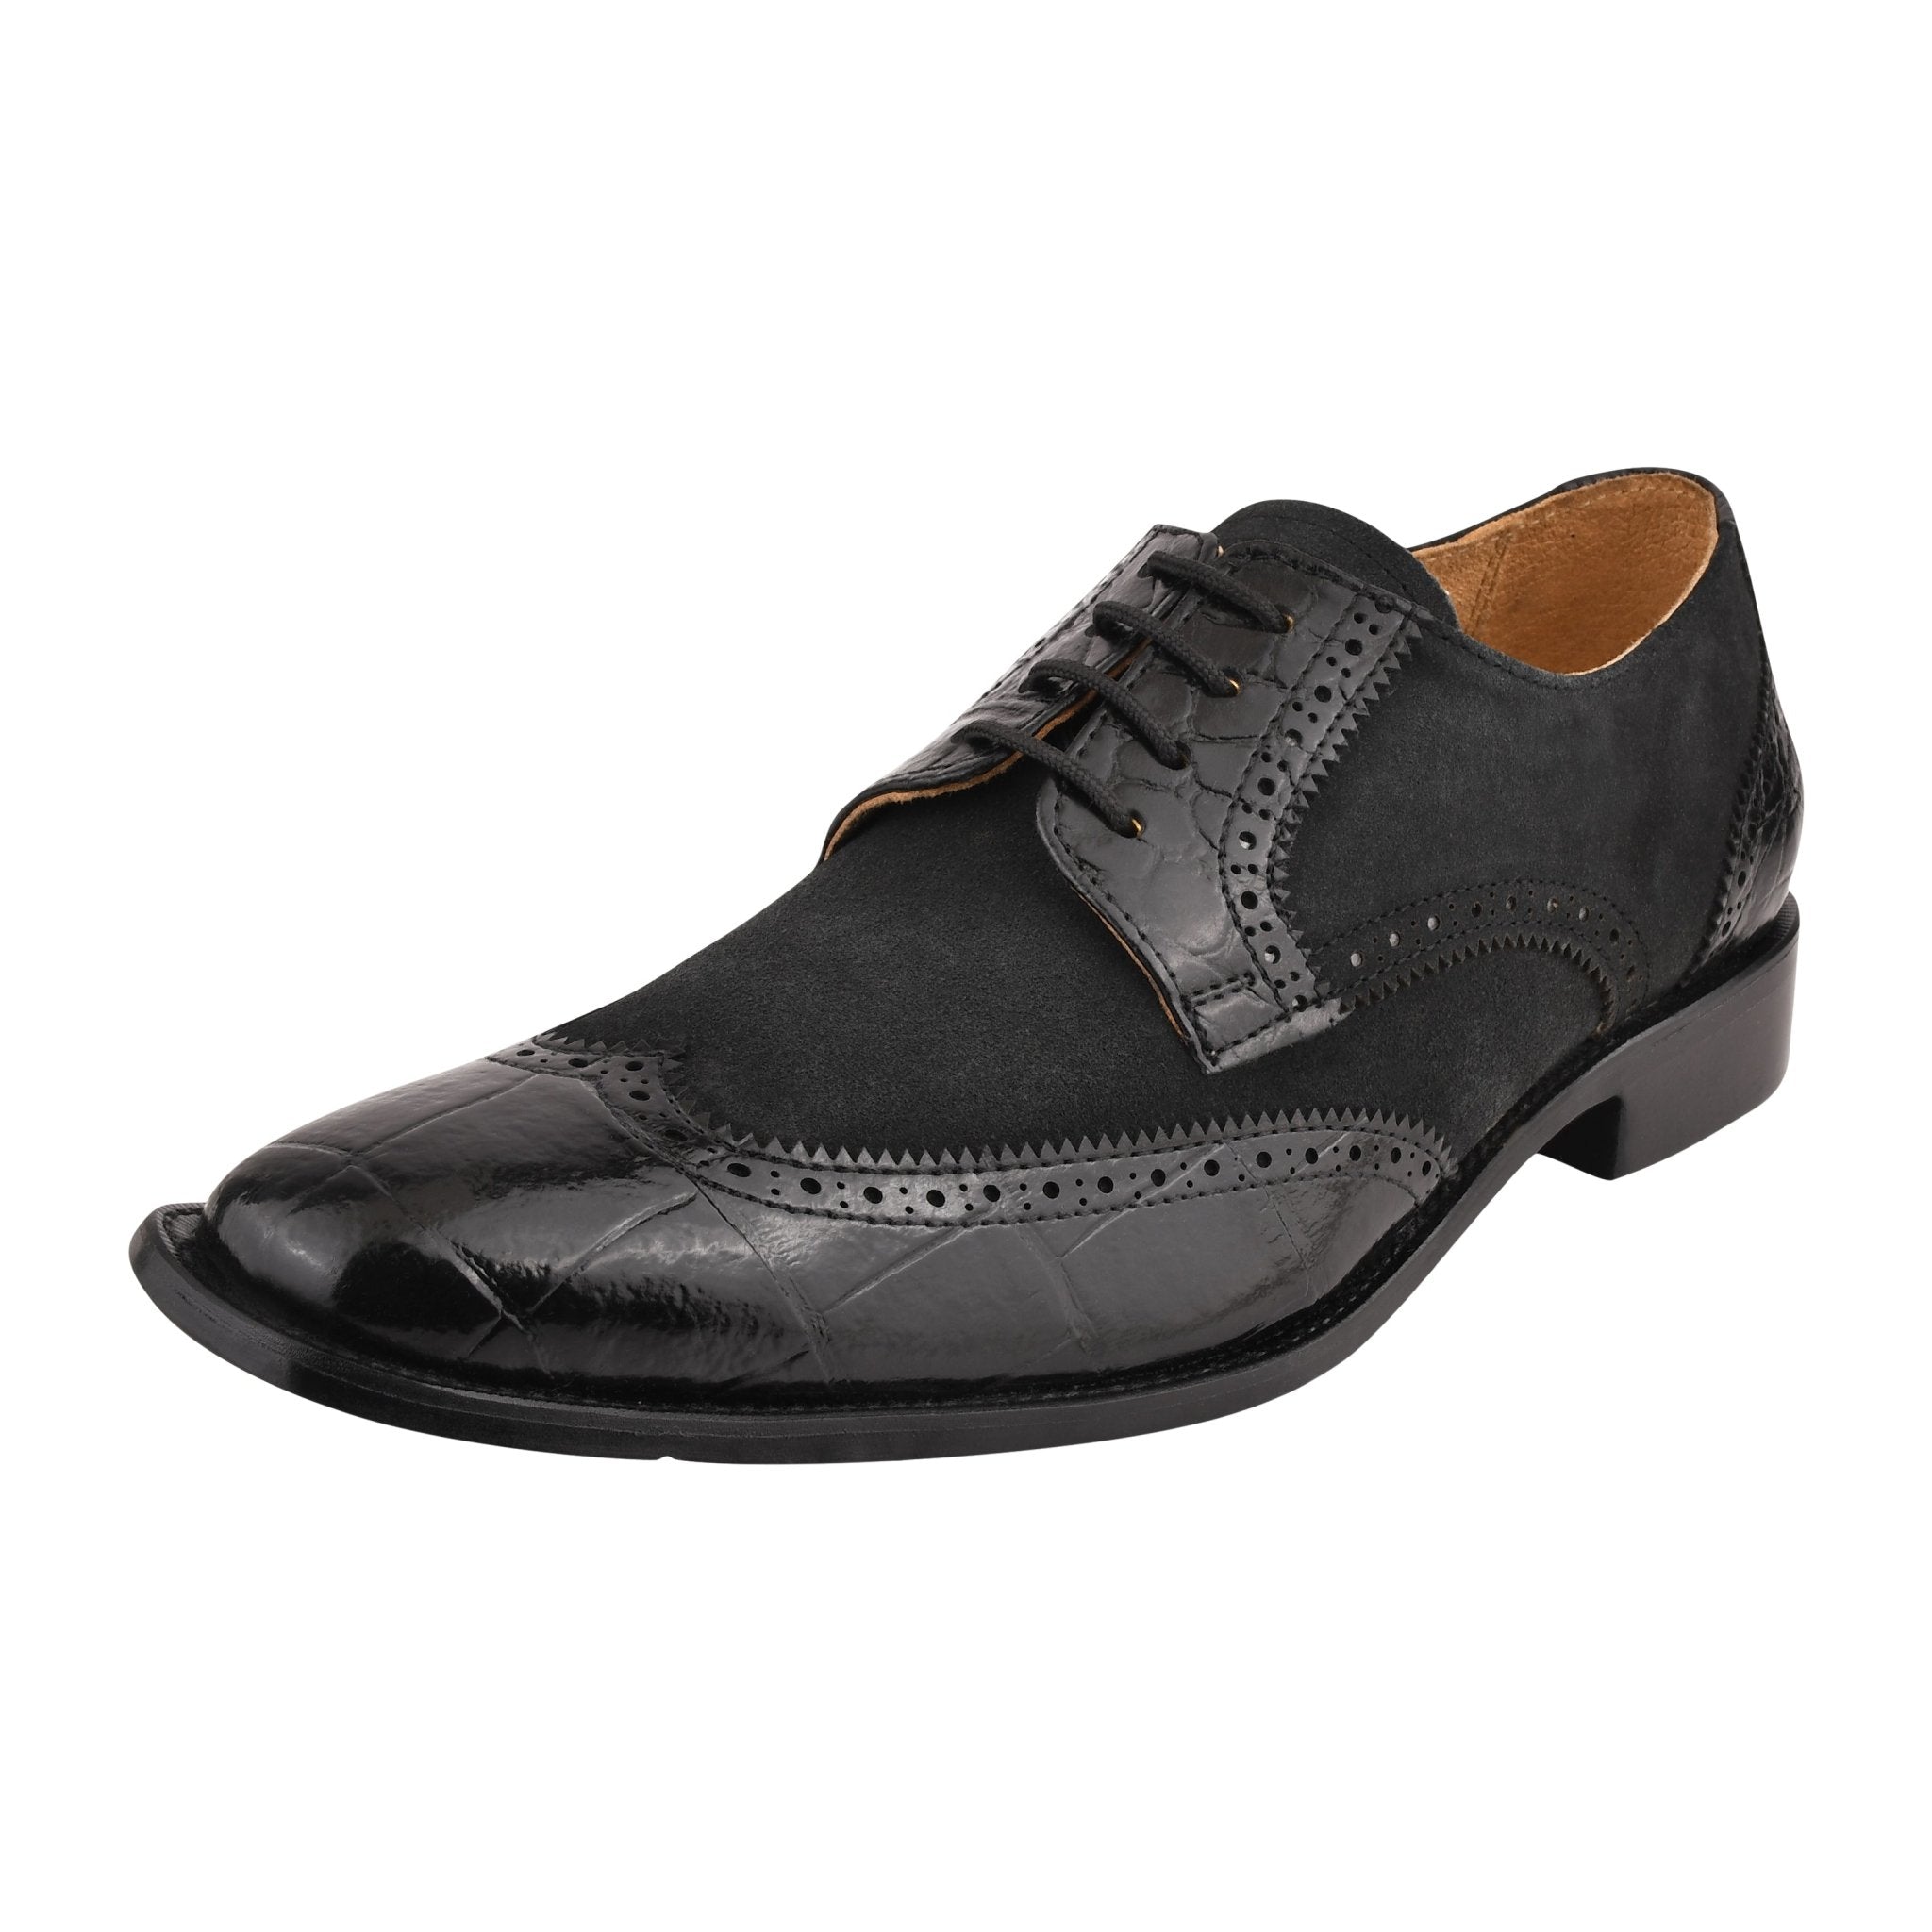 Macon Leather and Suede Crocodile Printed Oxford Dress Shoes